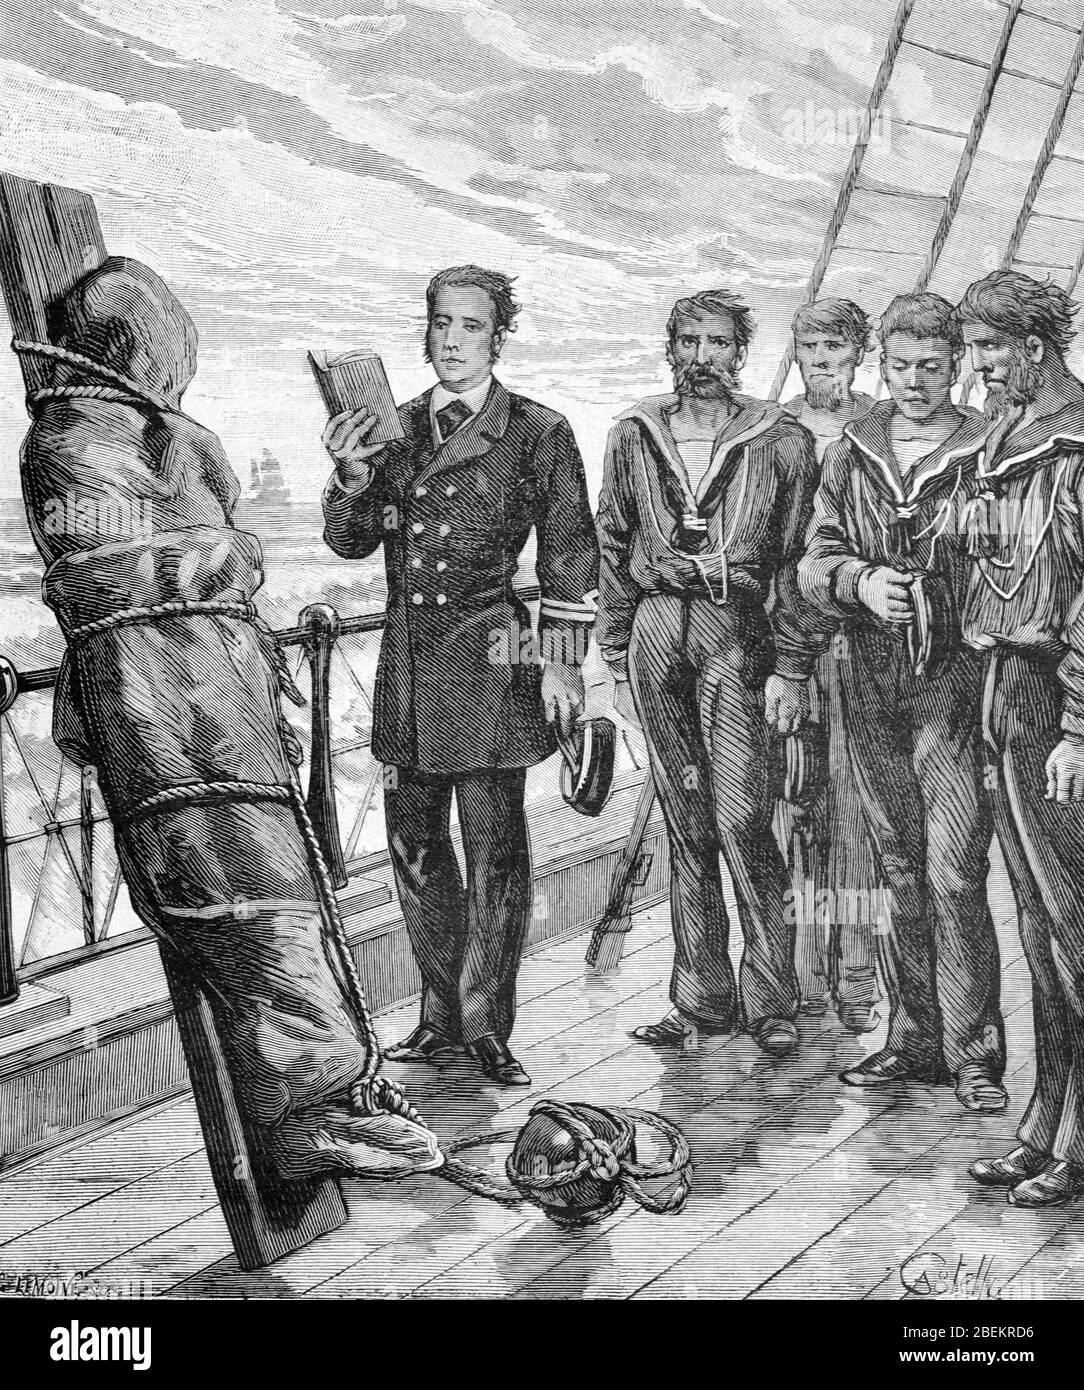 Burial at Sea during the American Civil War (1861-1865) aka American War of Secession. Vintage or Old Illustration or Engraving 1887 Stock Photo